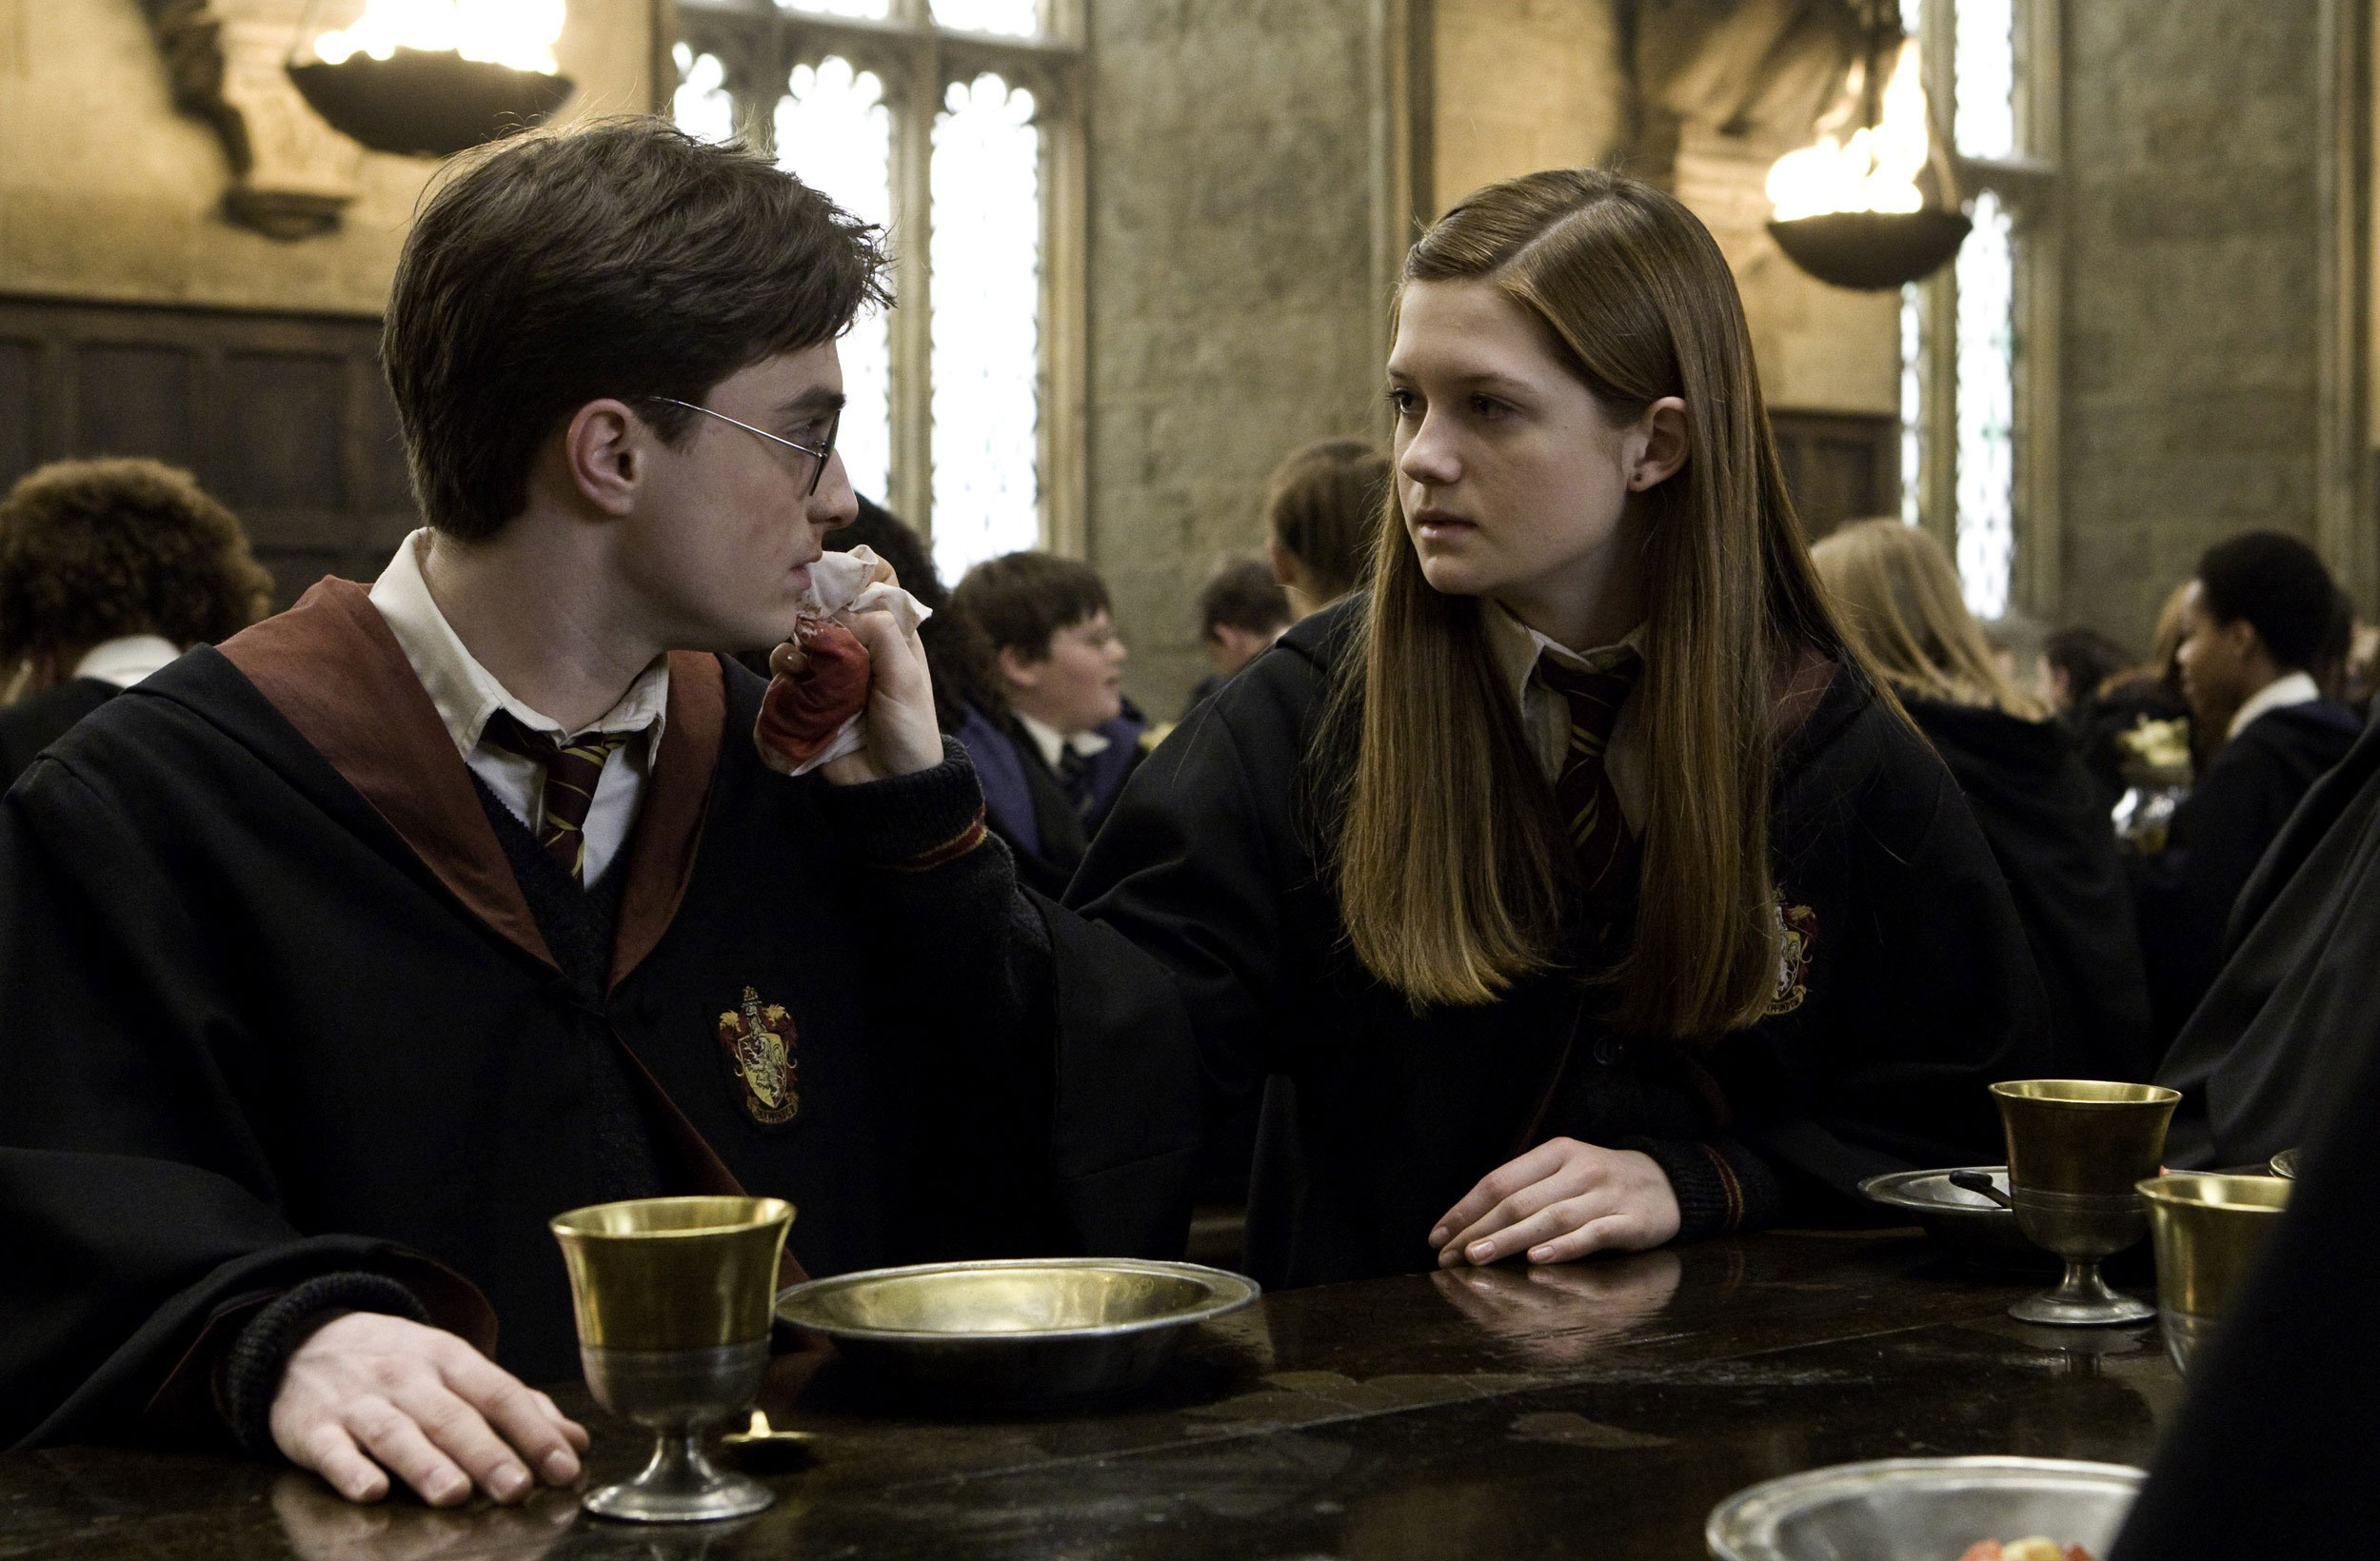 Ginny tending to Harry